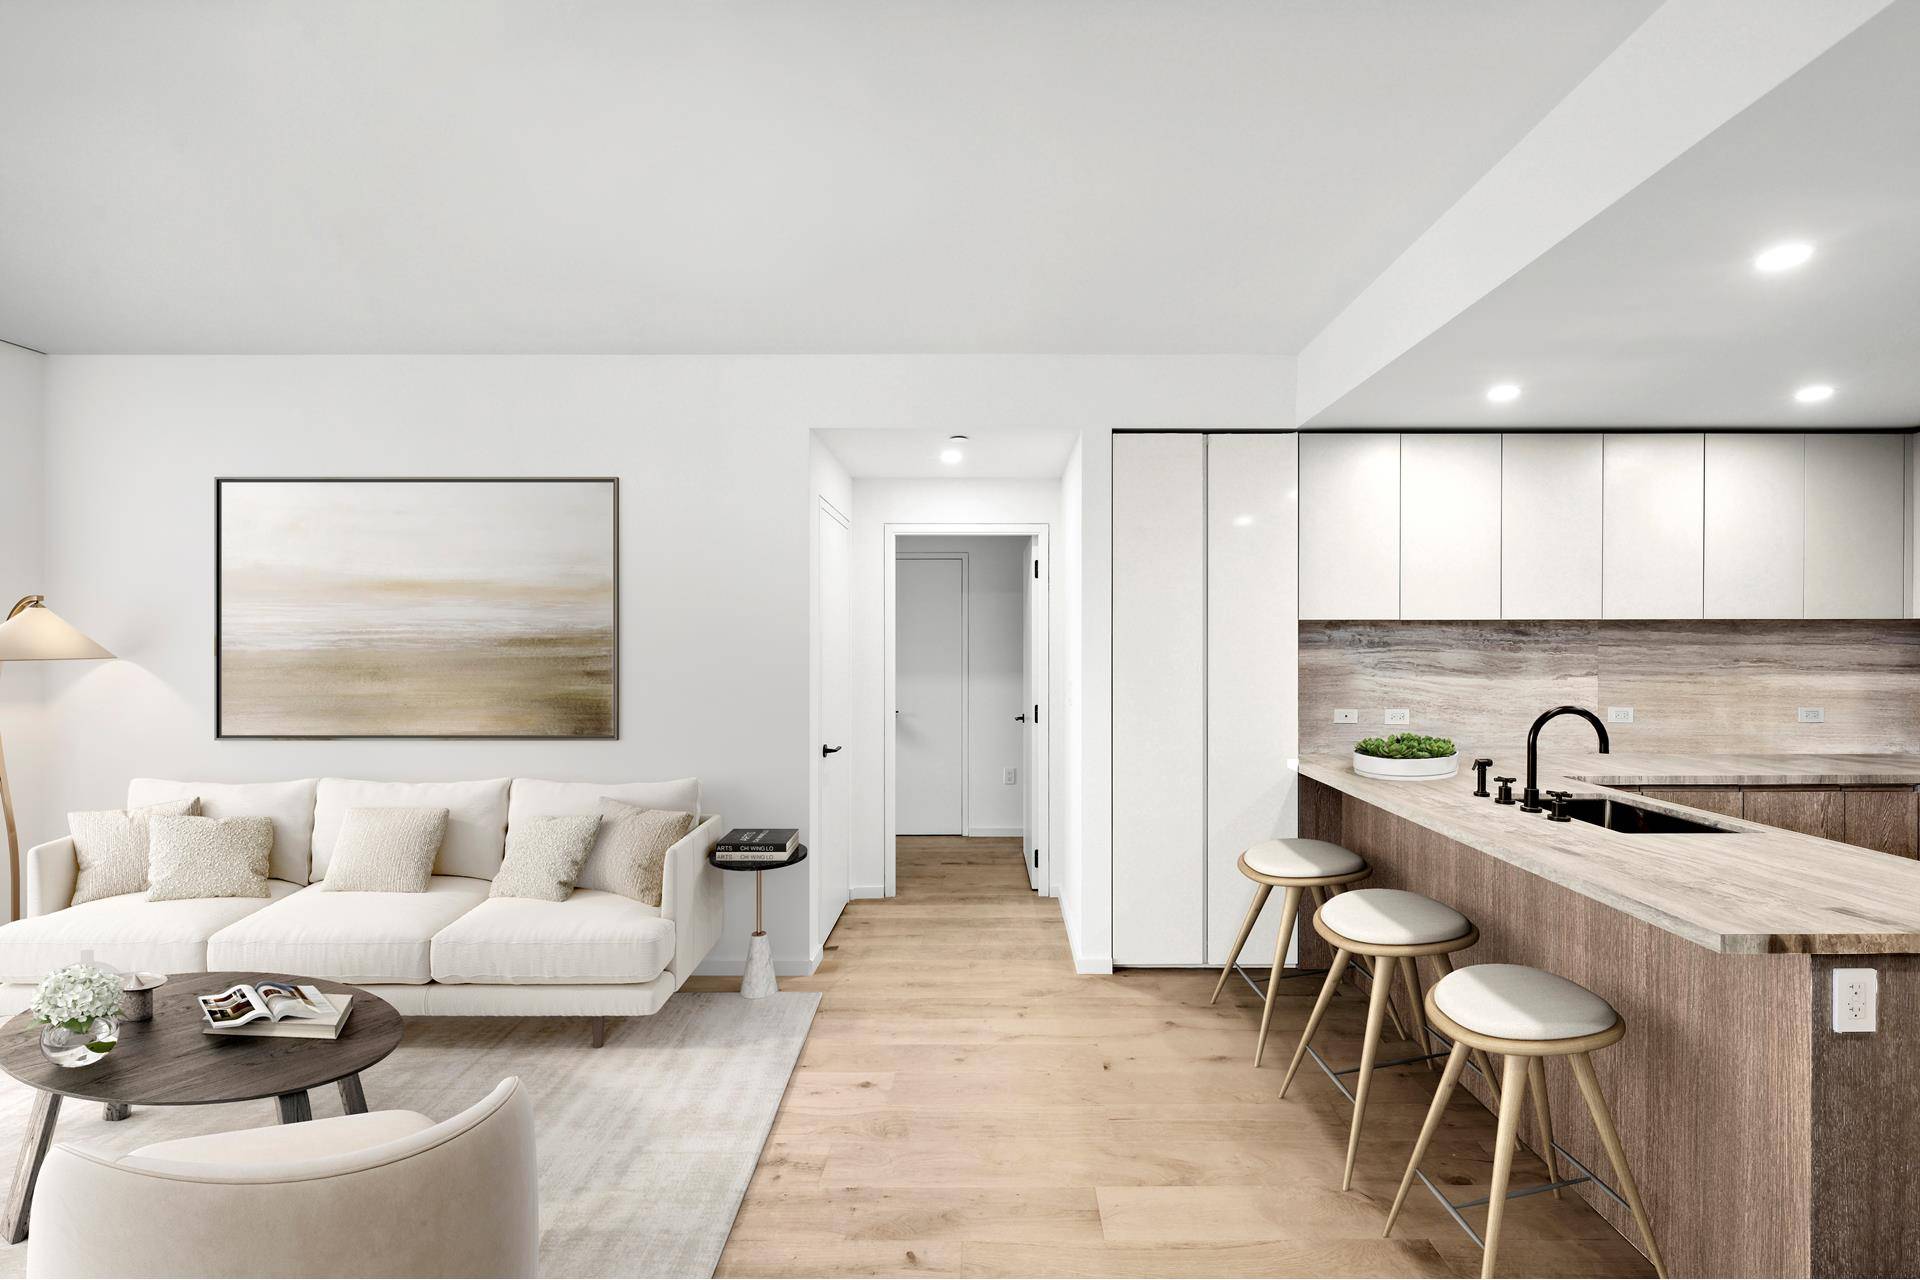 Presenting residence 2B a 975 SF 1 bedroom 2 bathroom residence designed by TalliTien.